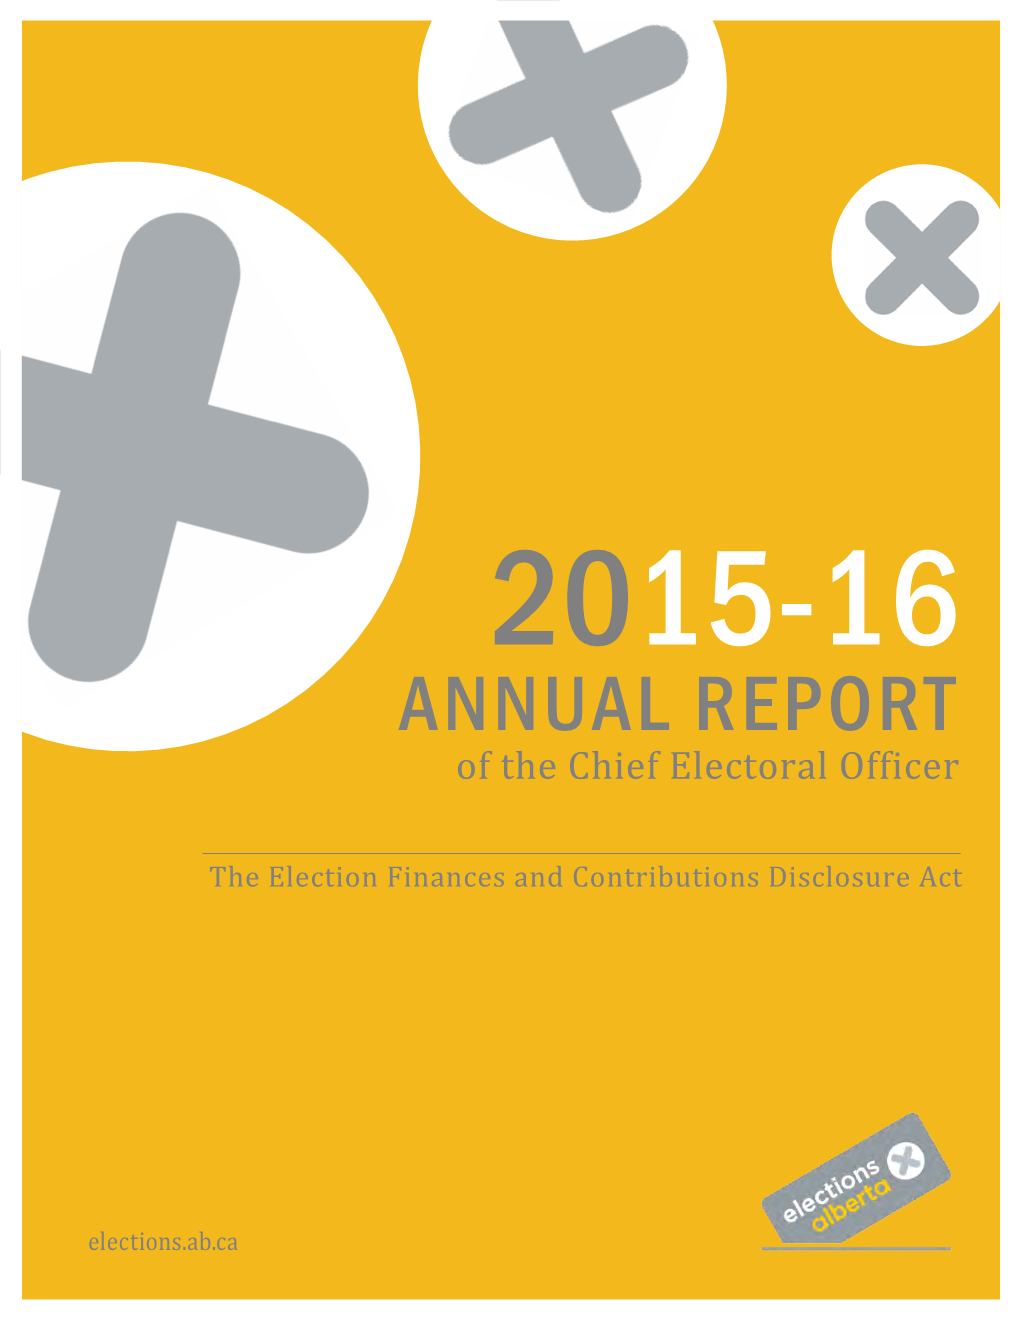 ANNUAL REPORT of the Chief Electoral Officer